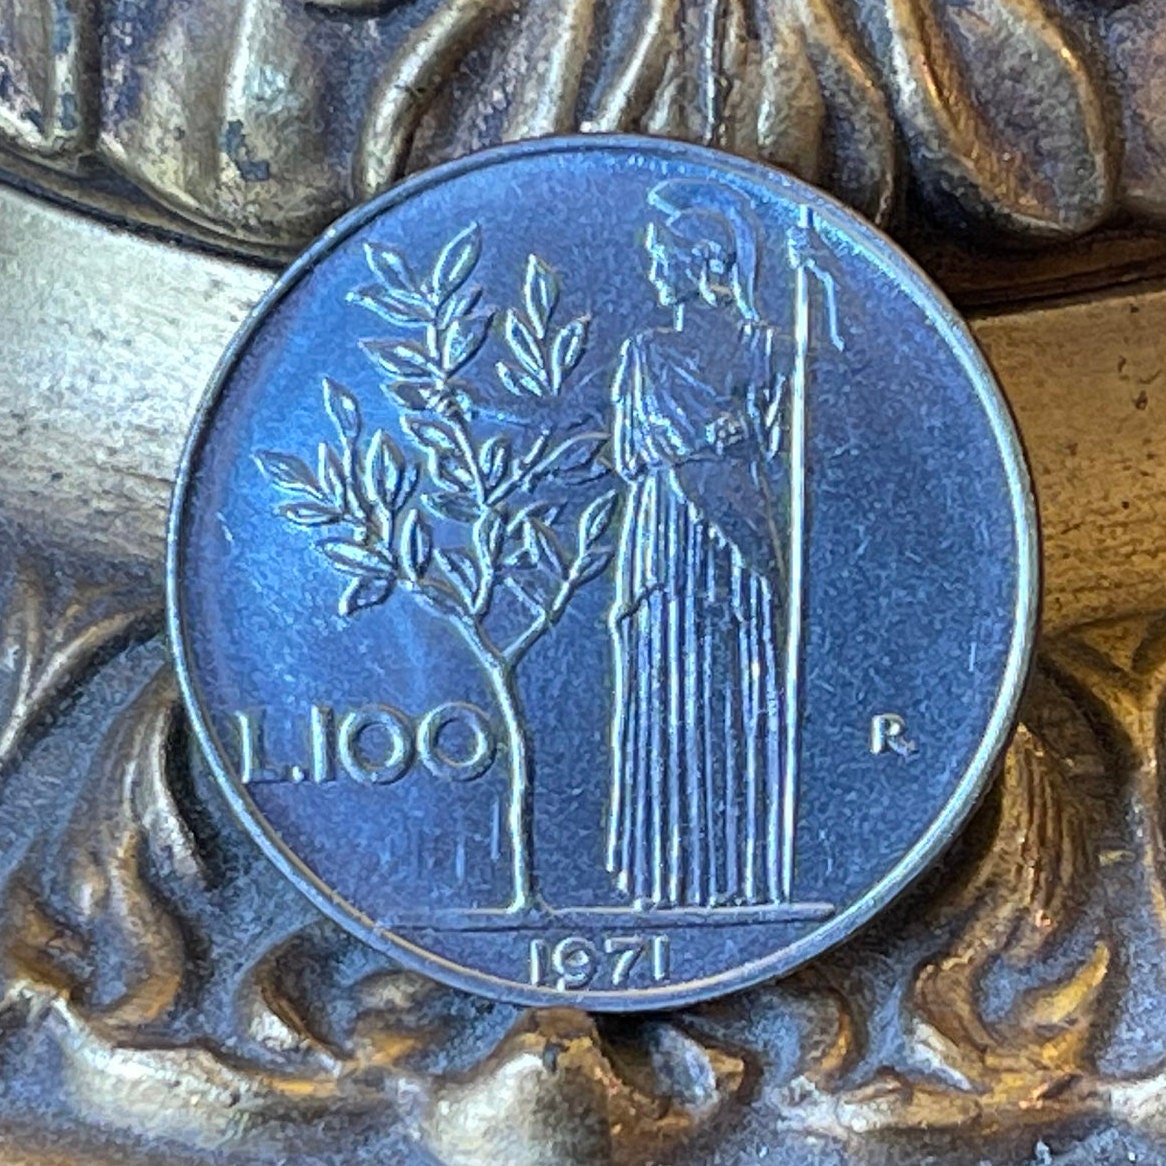 Goddess Minerva & Olive Tree 100 Lire Italy Authentic Coin Money for Jewelry and Craft Making (Goddess Athena)